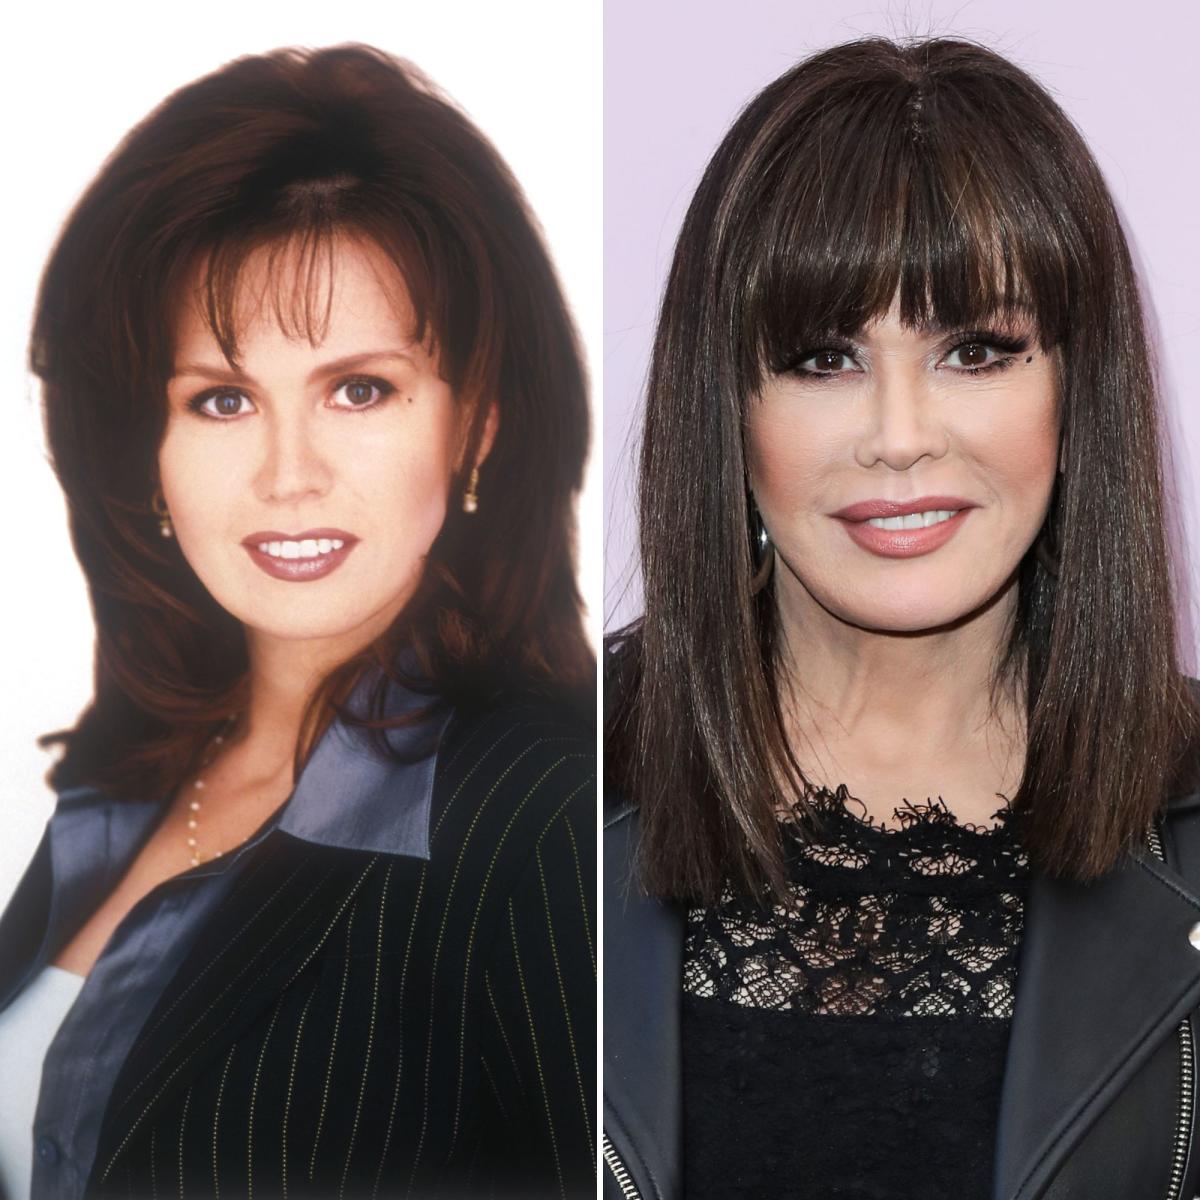 Marie Osmond Fans Accuse Her of Plastic Surgery ‘You Look Like Kim